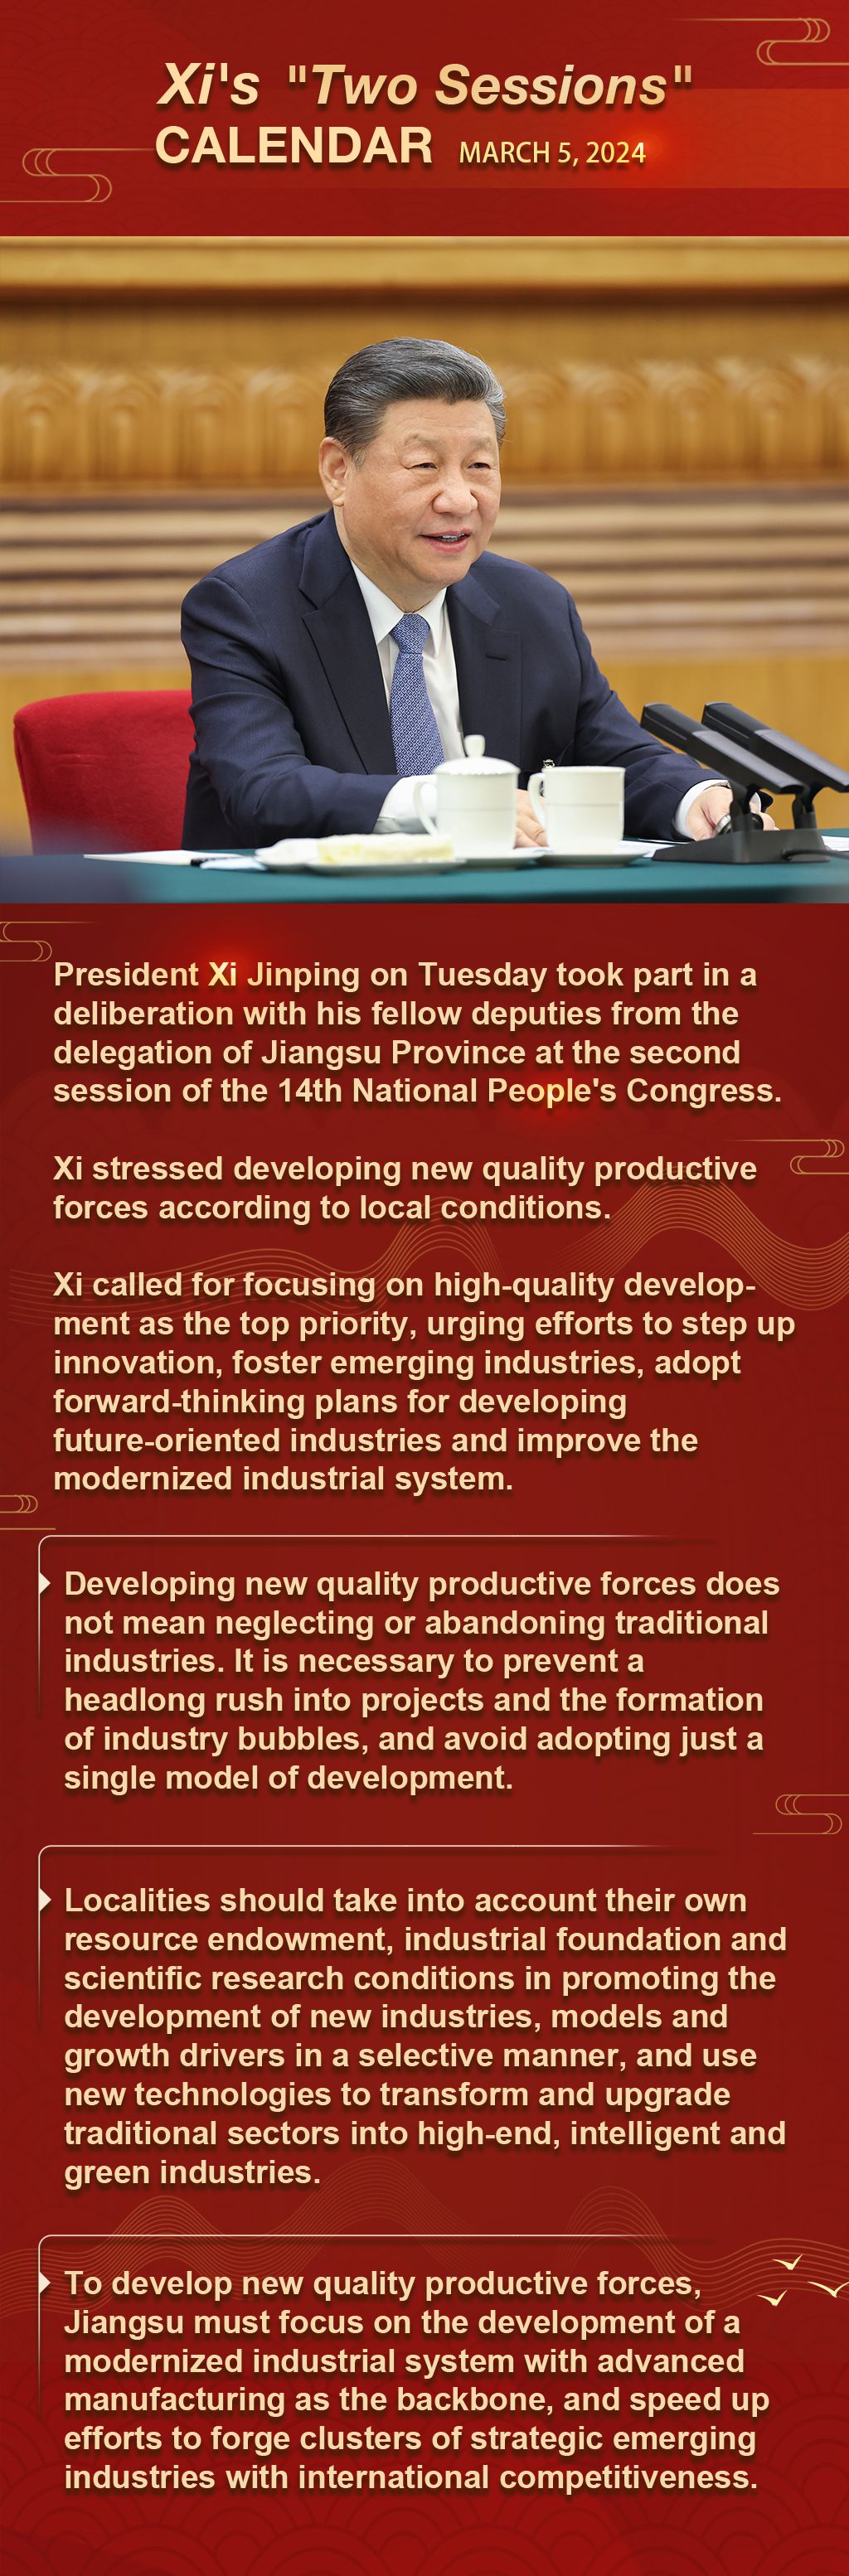 Xi's "Two Sessions" Calendar: Xi takes part in deliberation at annual national legislative session